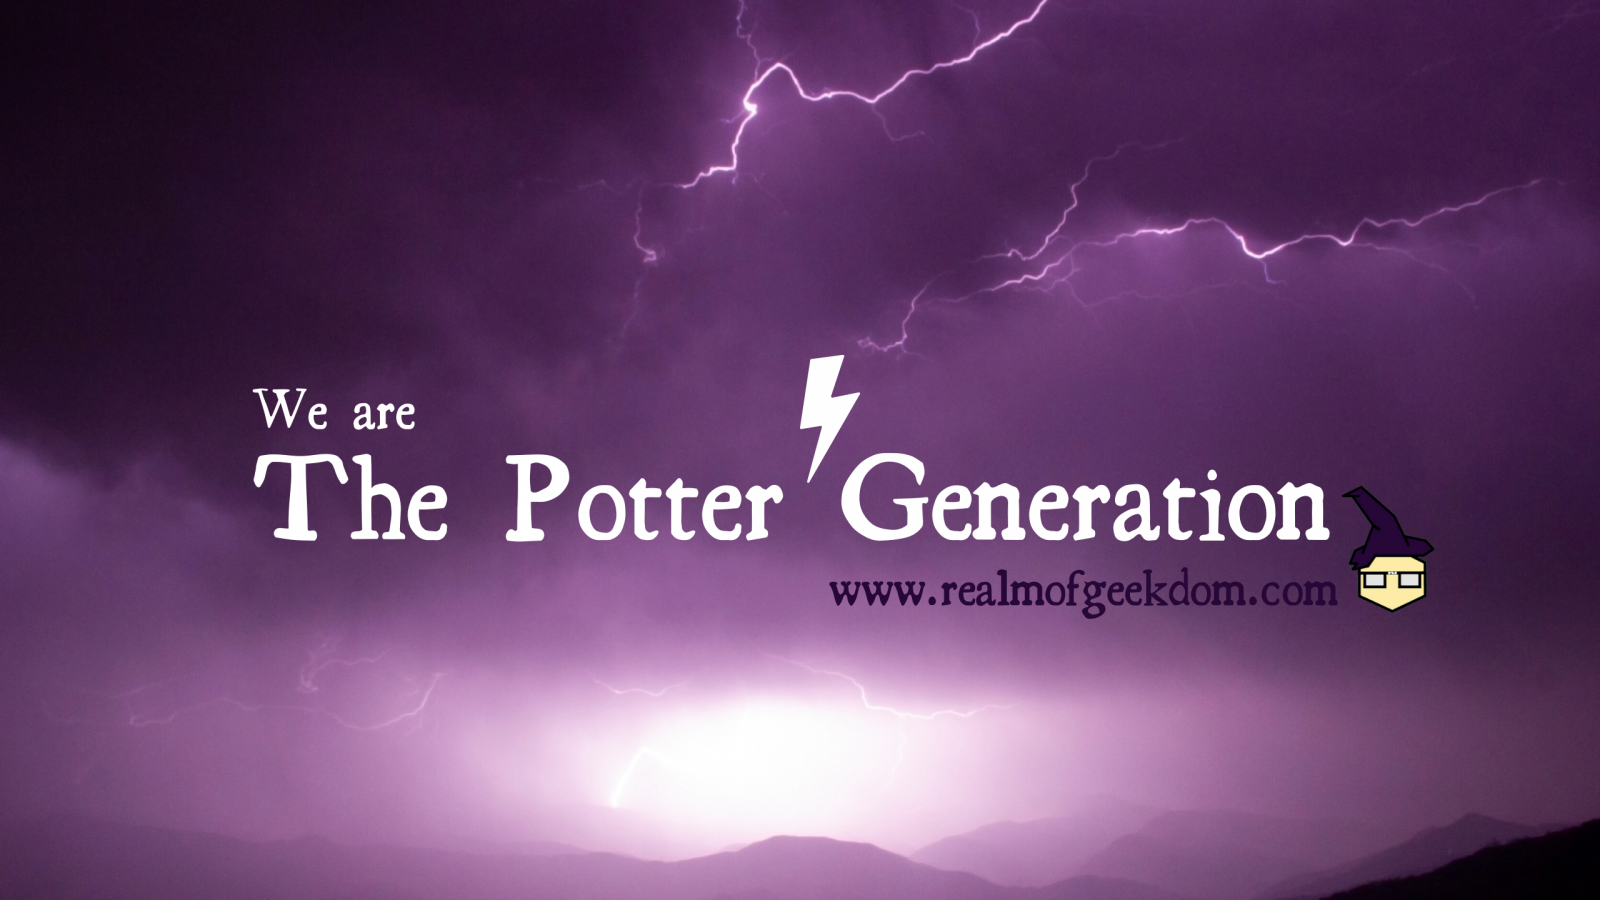 We are the Potter Generation